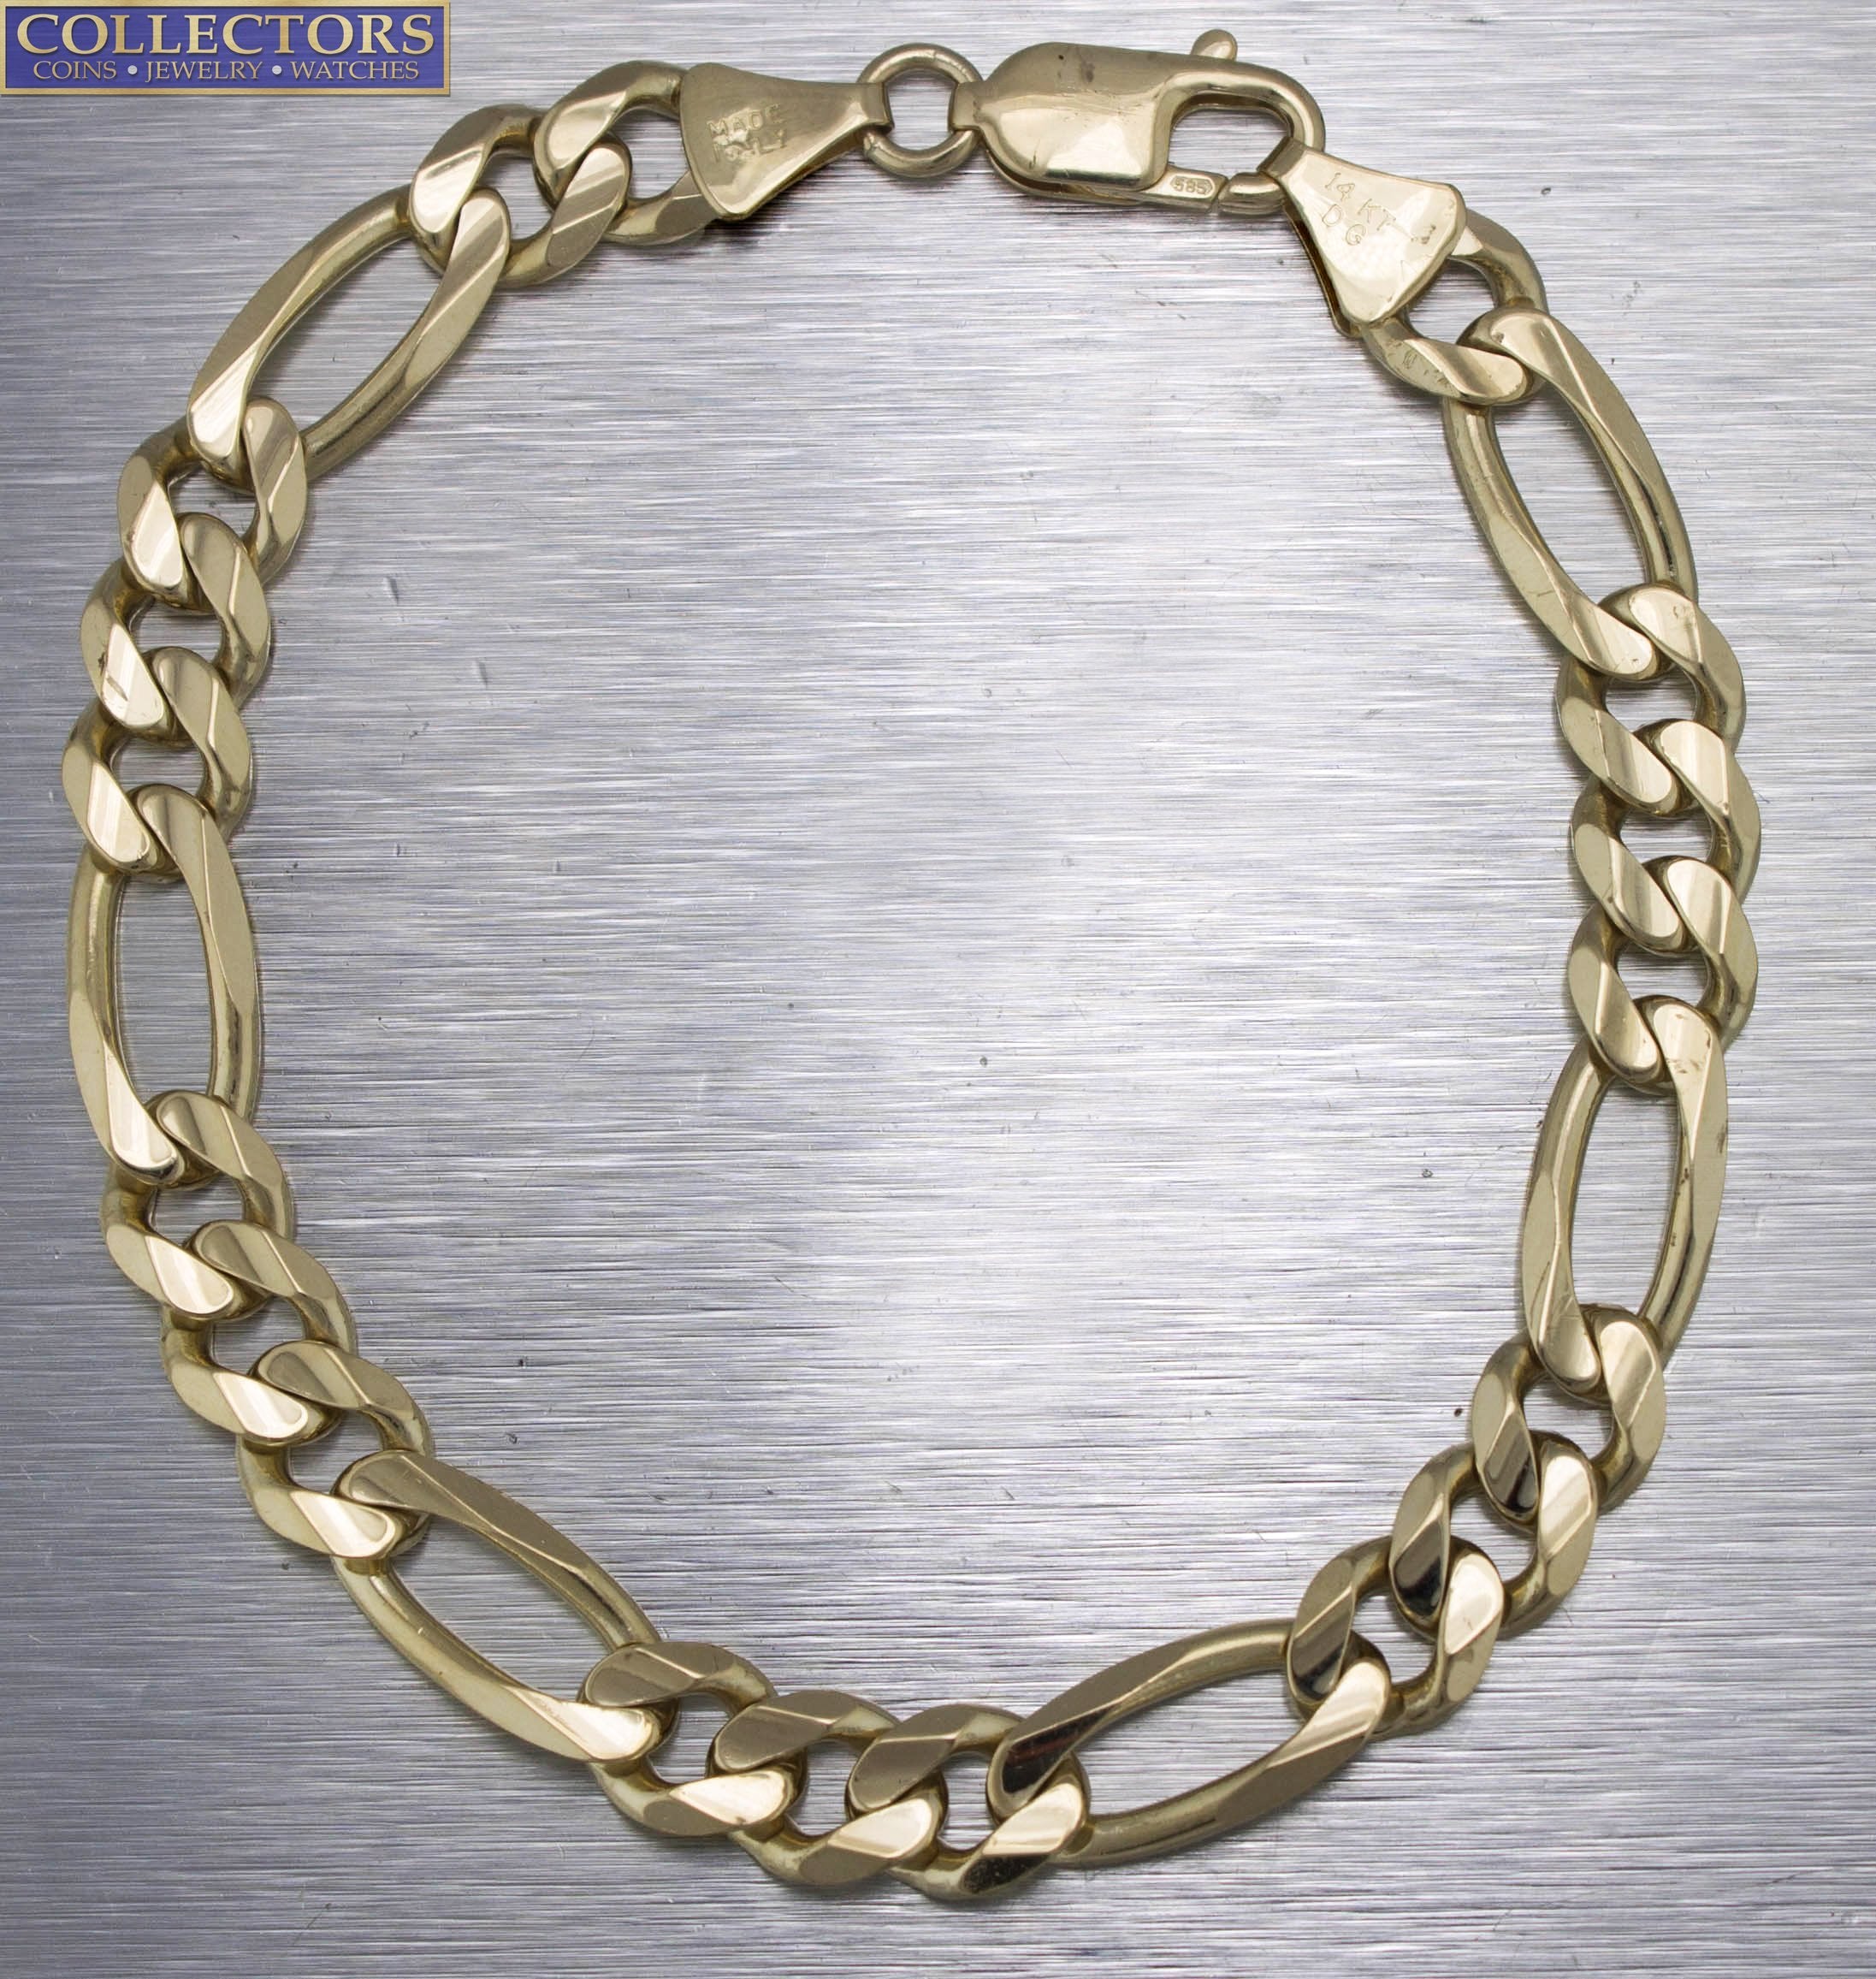 Curb Chain Bracelet in 18K Yellow Gold with Diamonds, 8mm